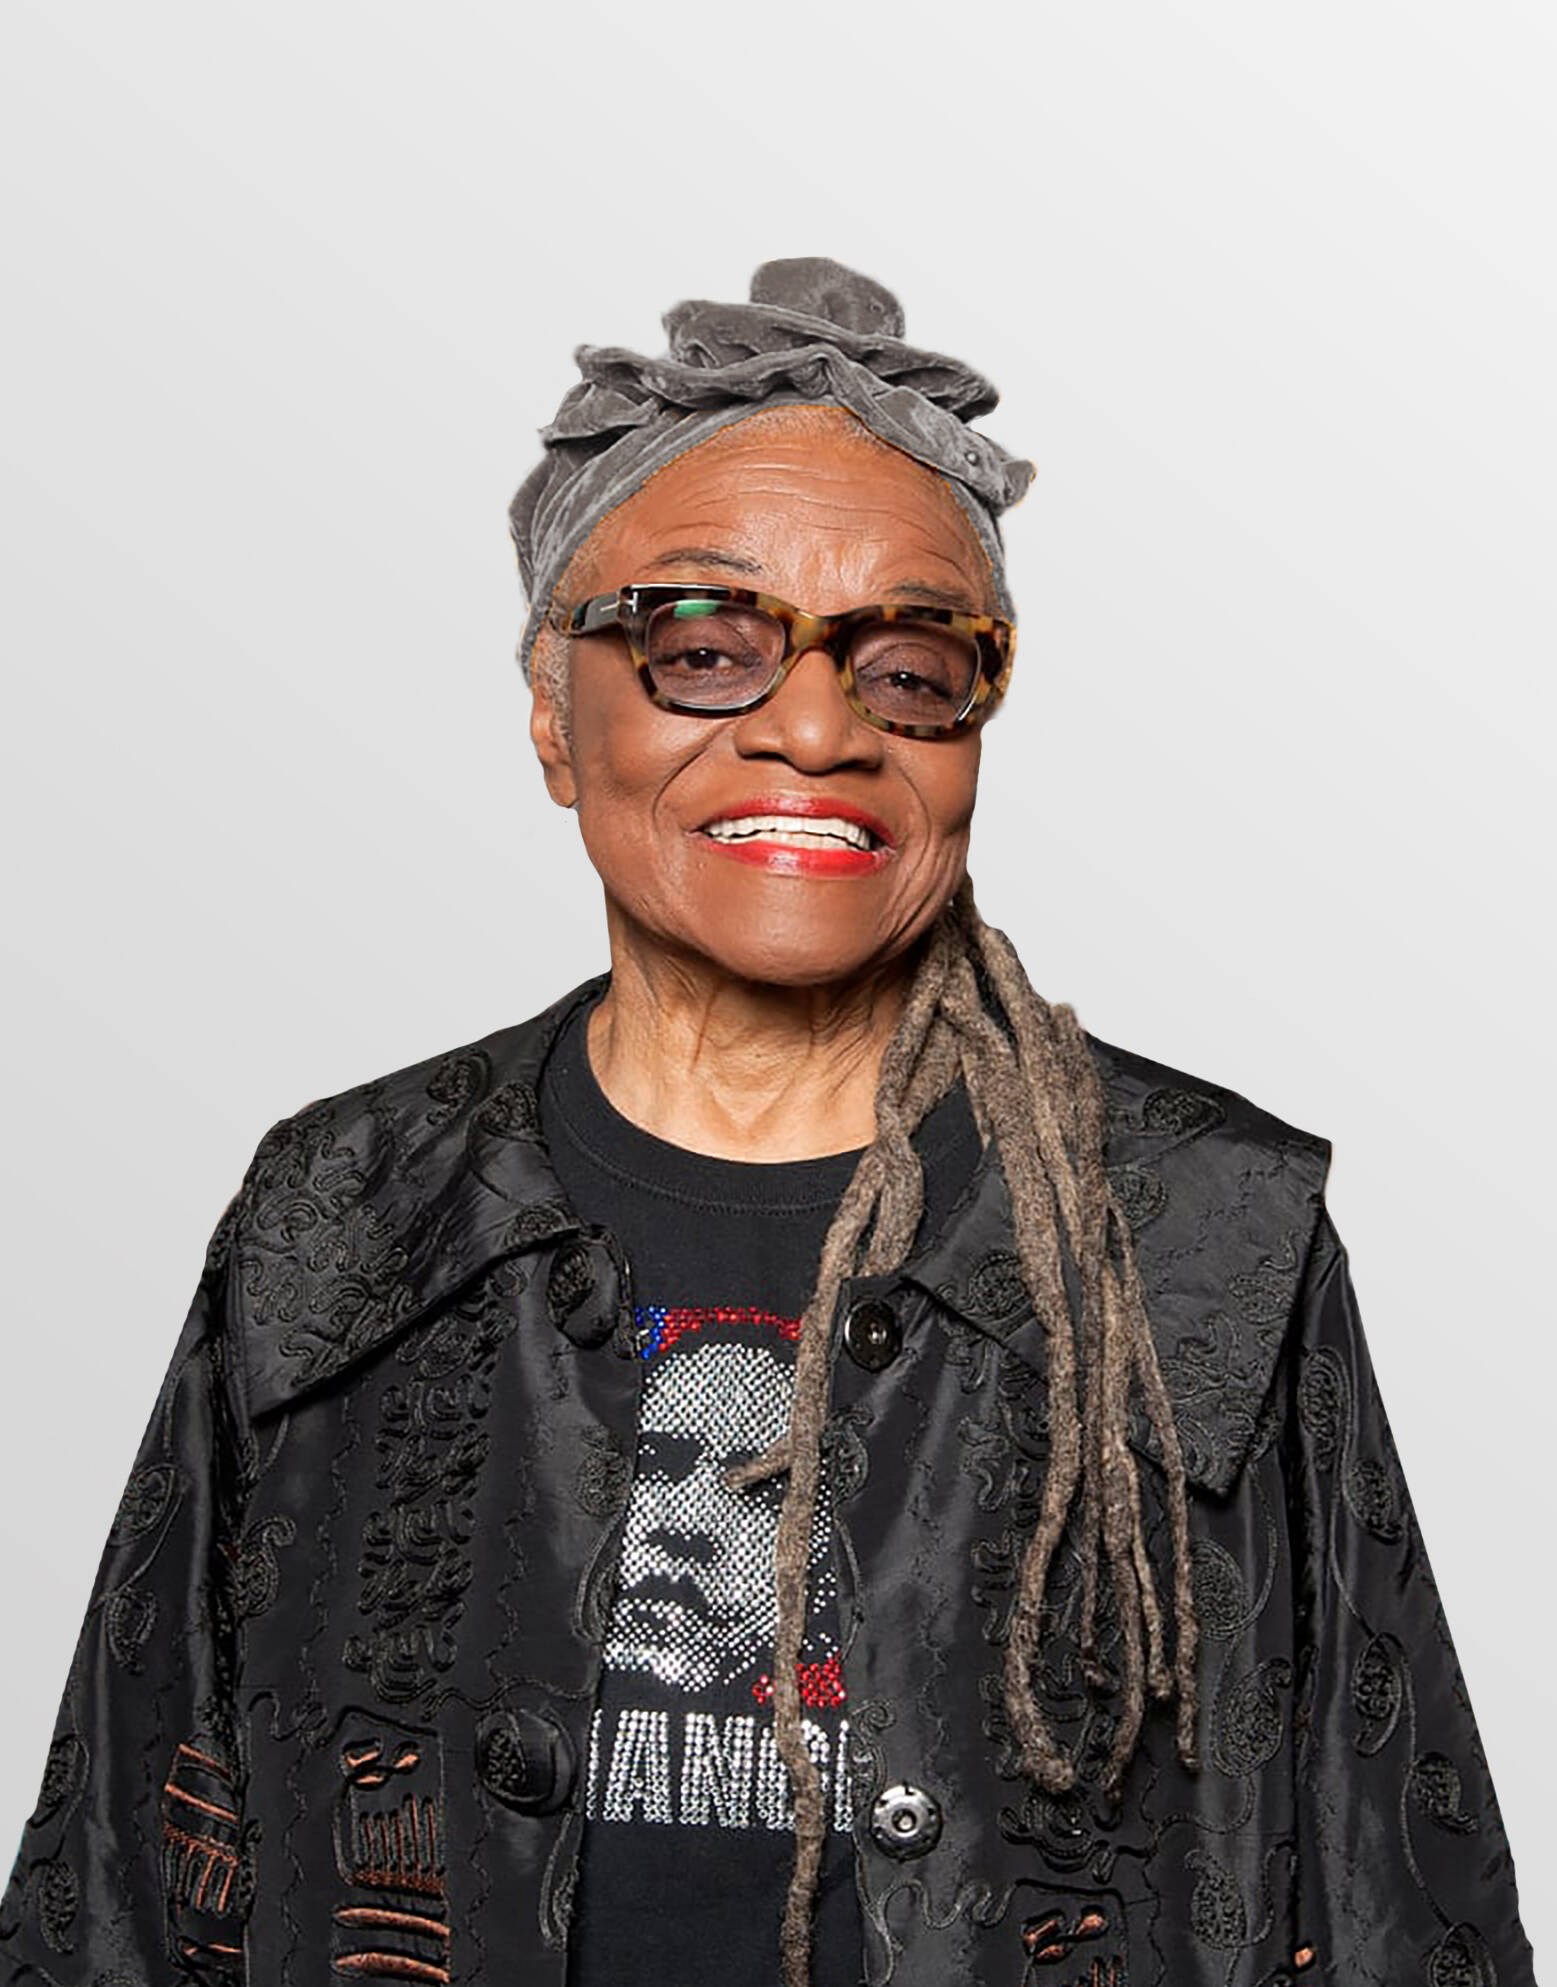 The life of Die, Faith Ringgold’s startling masterpiece